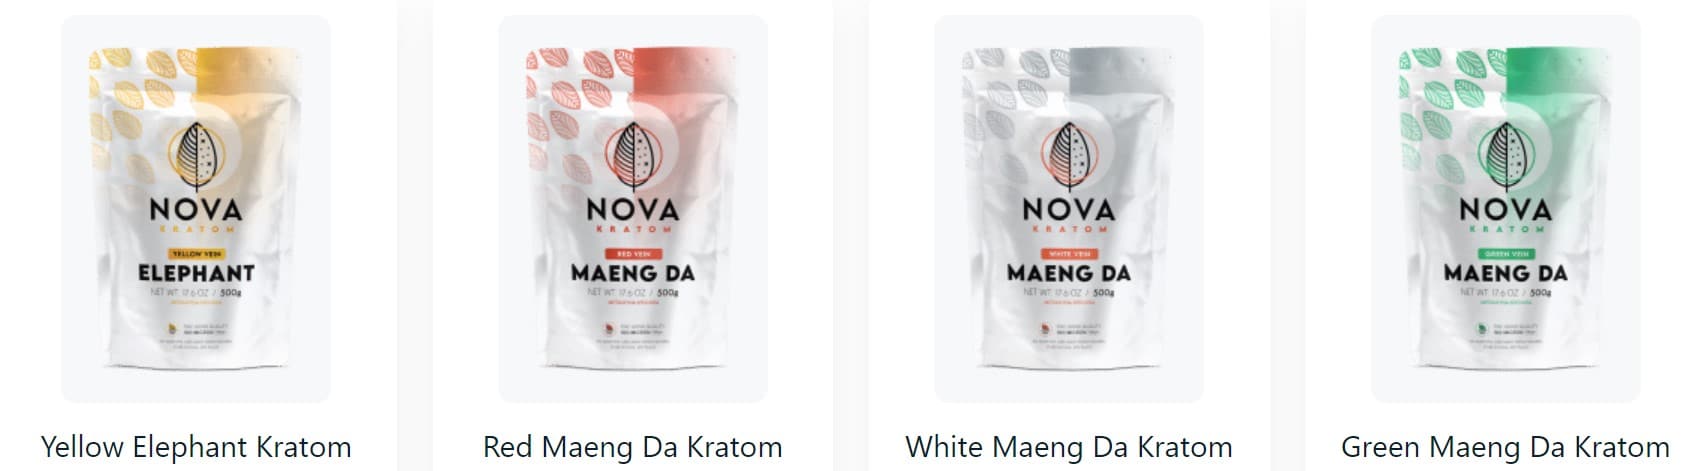 image of nova kratom products review